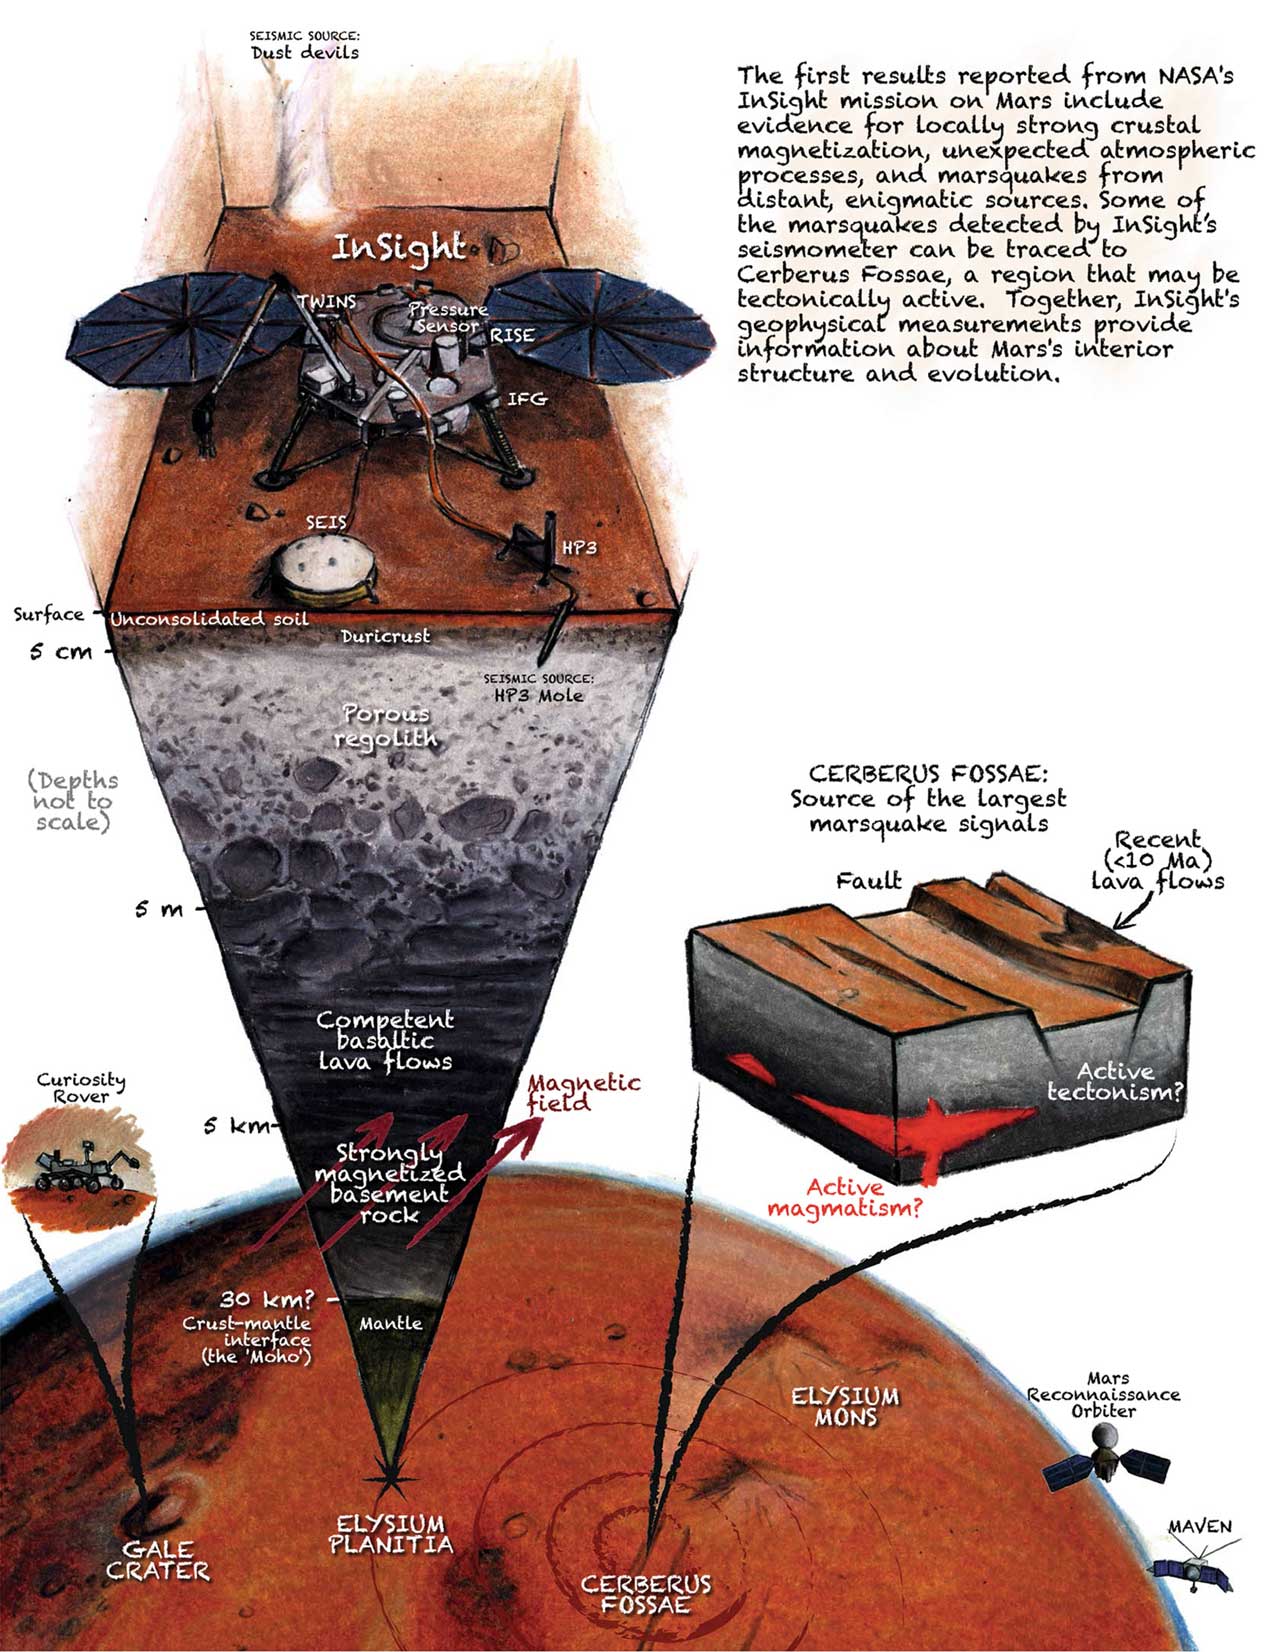 A cutaway view of Mars showing the InSight lander studying seismic activity.